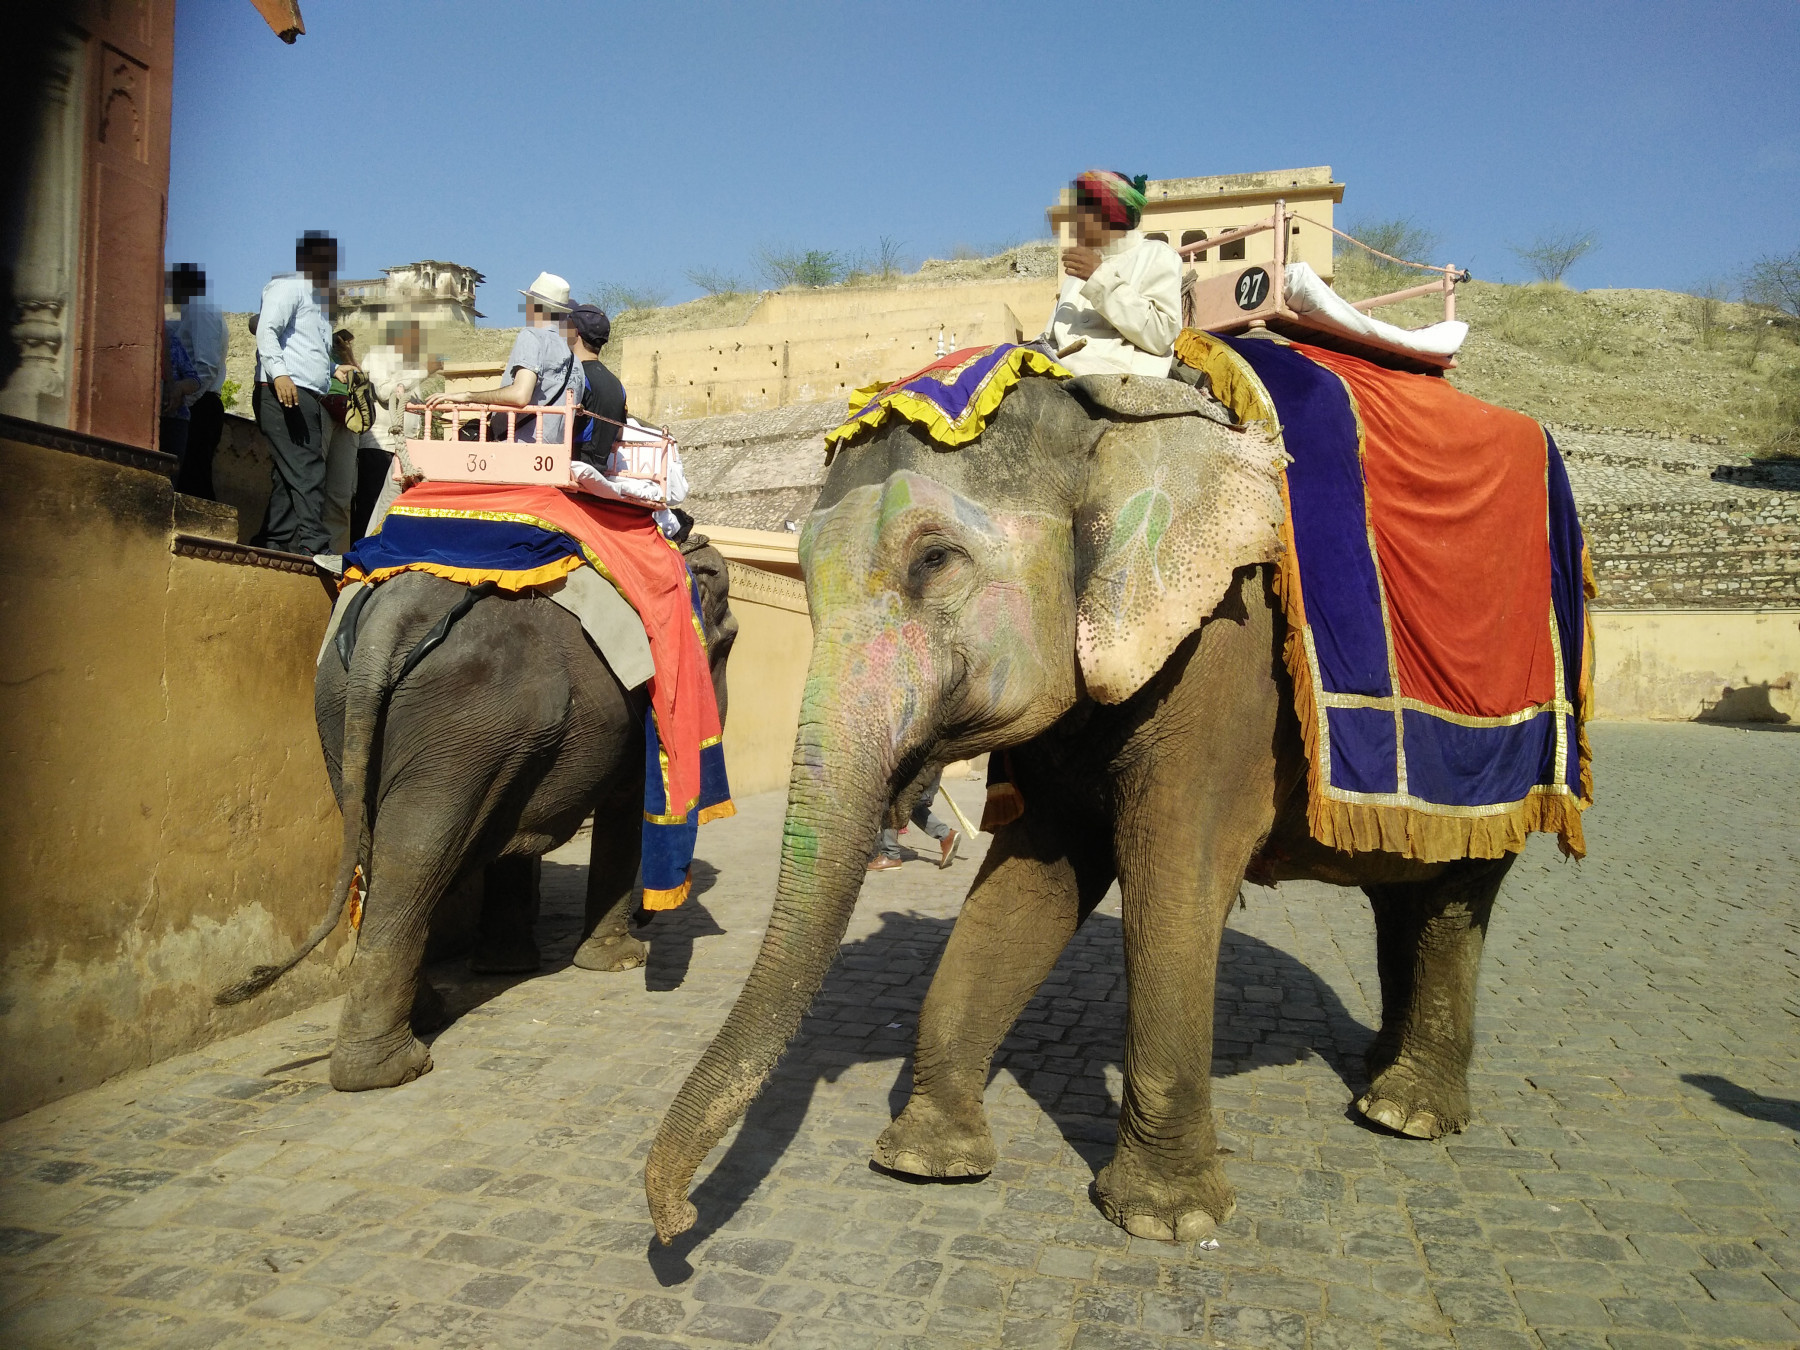 An elephant at Amer Fort with a human on their back riding them